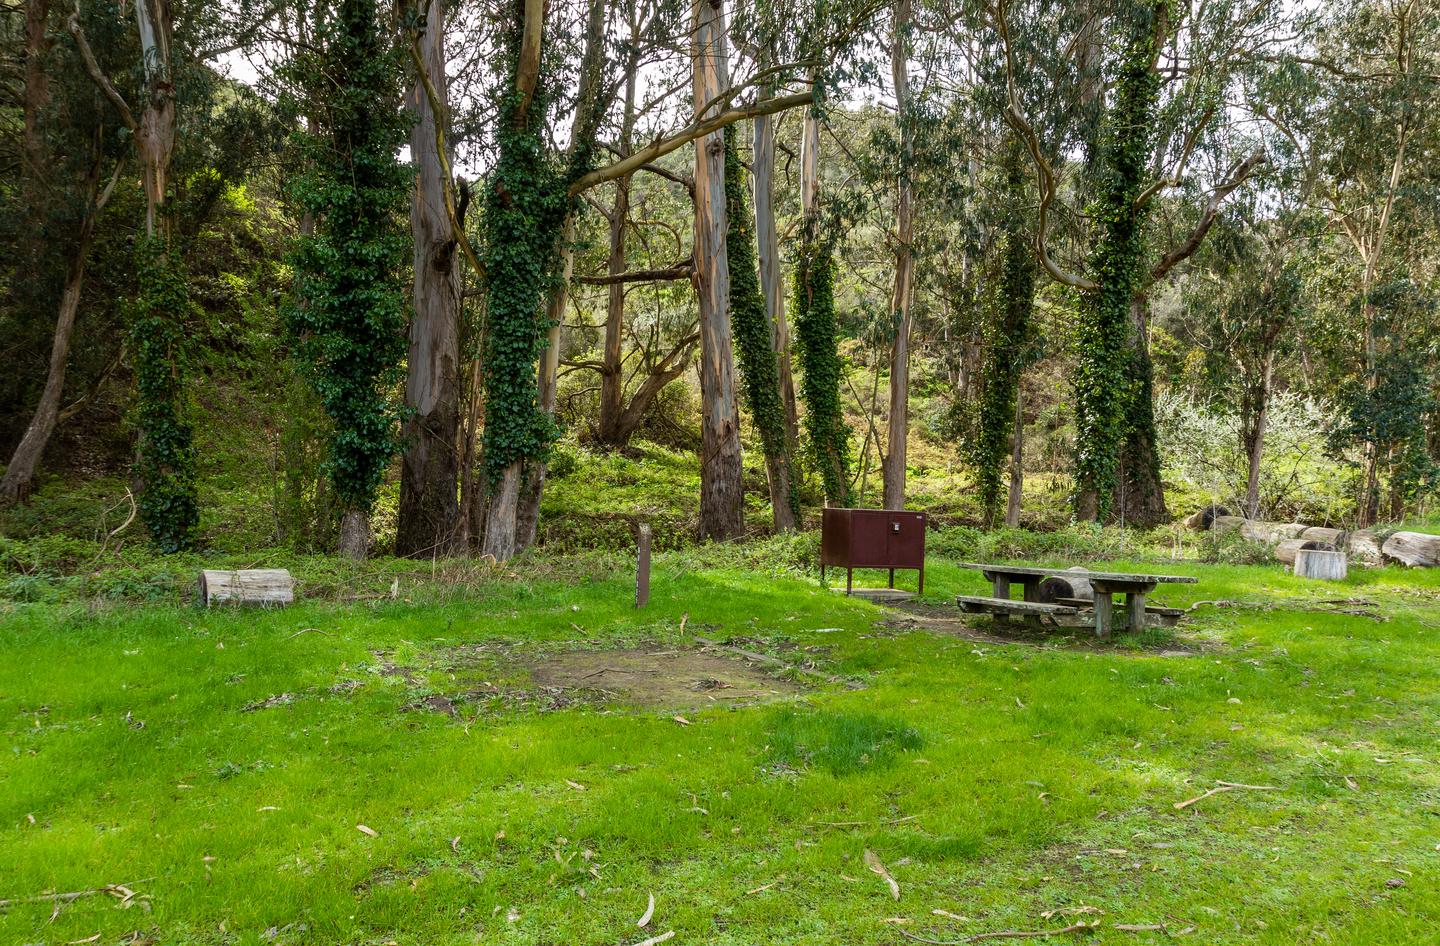 Picnic table, bear locker, and post reading "3" surrounded by green grass and a dirt patch for one of the campsites tent pads. Behind are eucalyptus trees, many covered in ivy.Site 3 of Haypress Campground